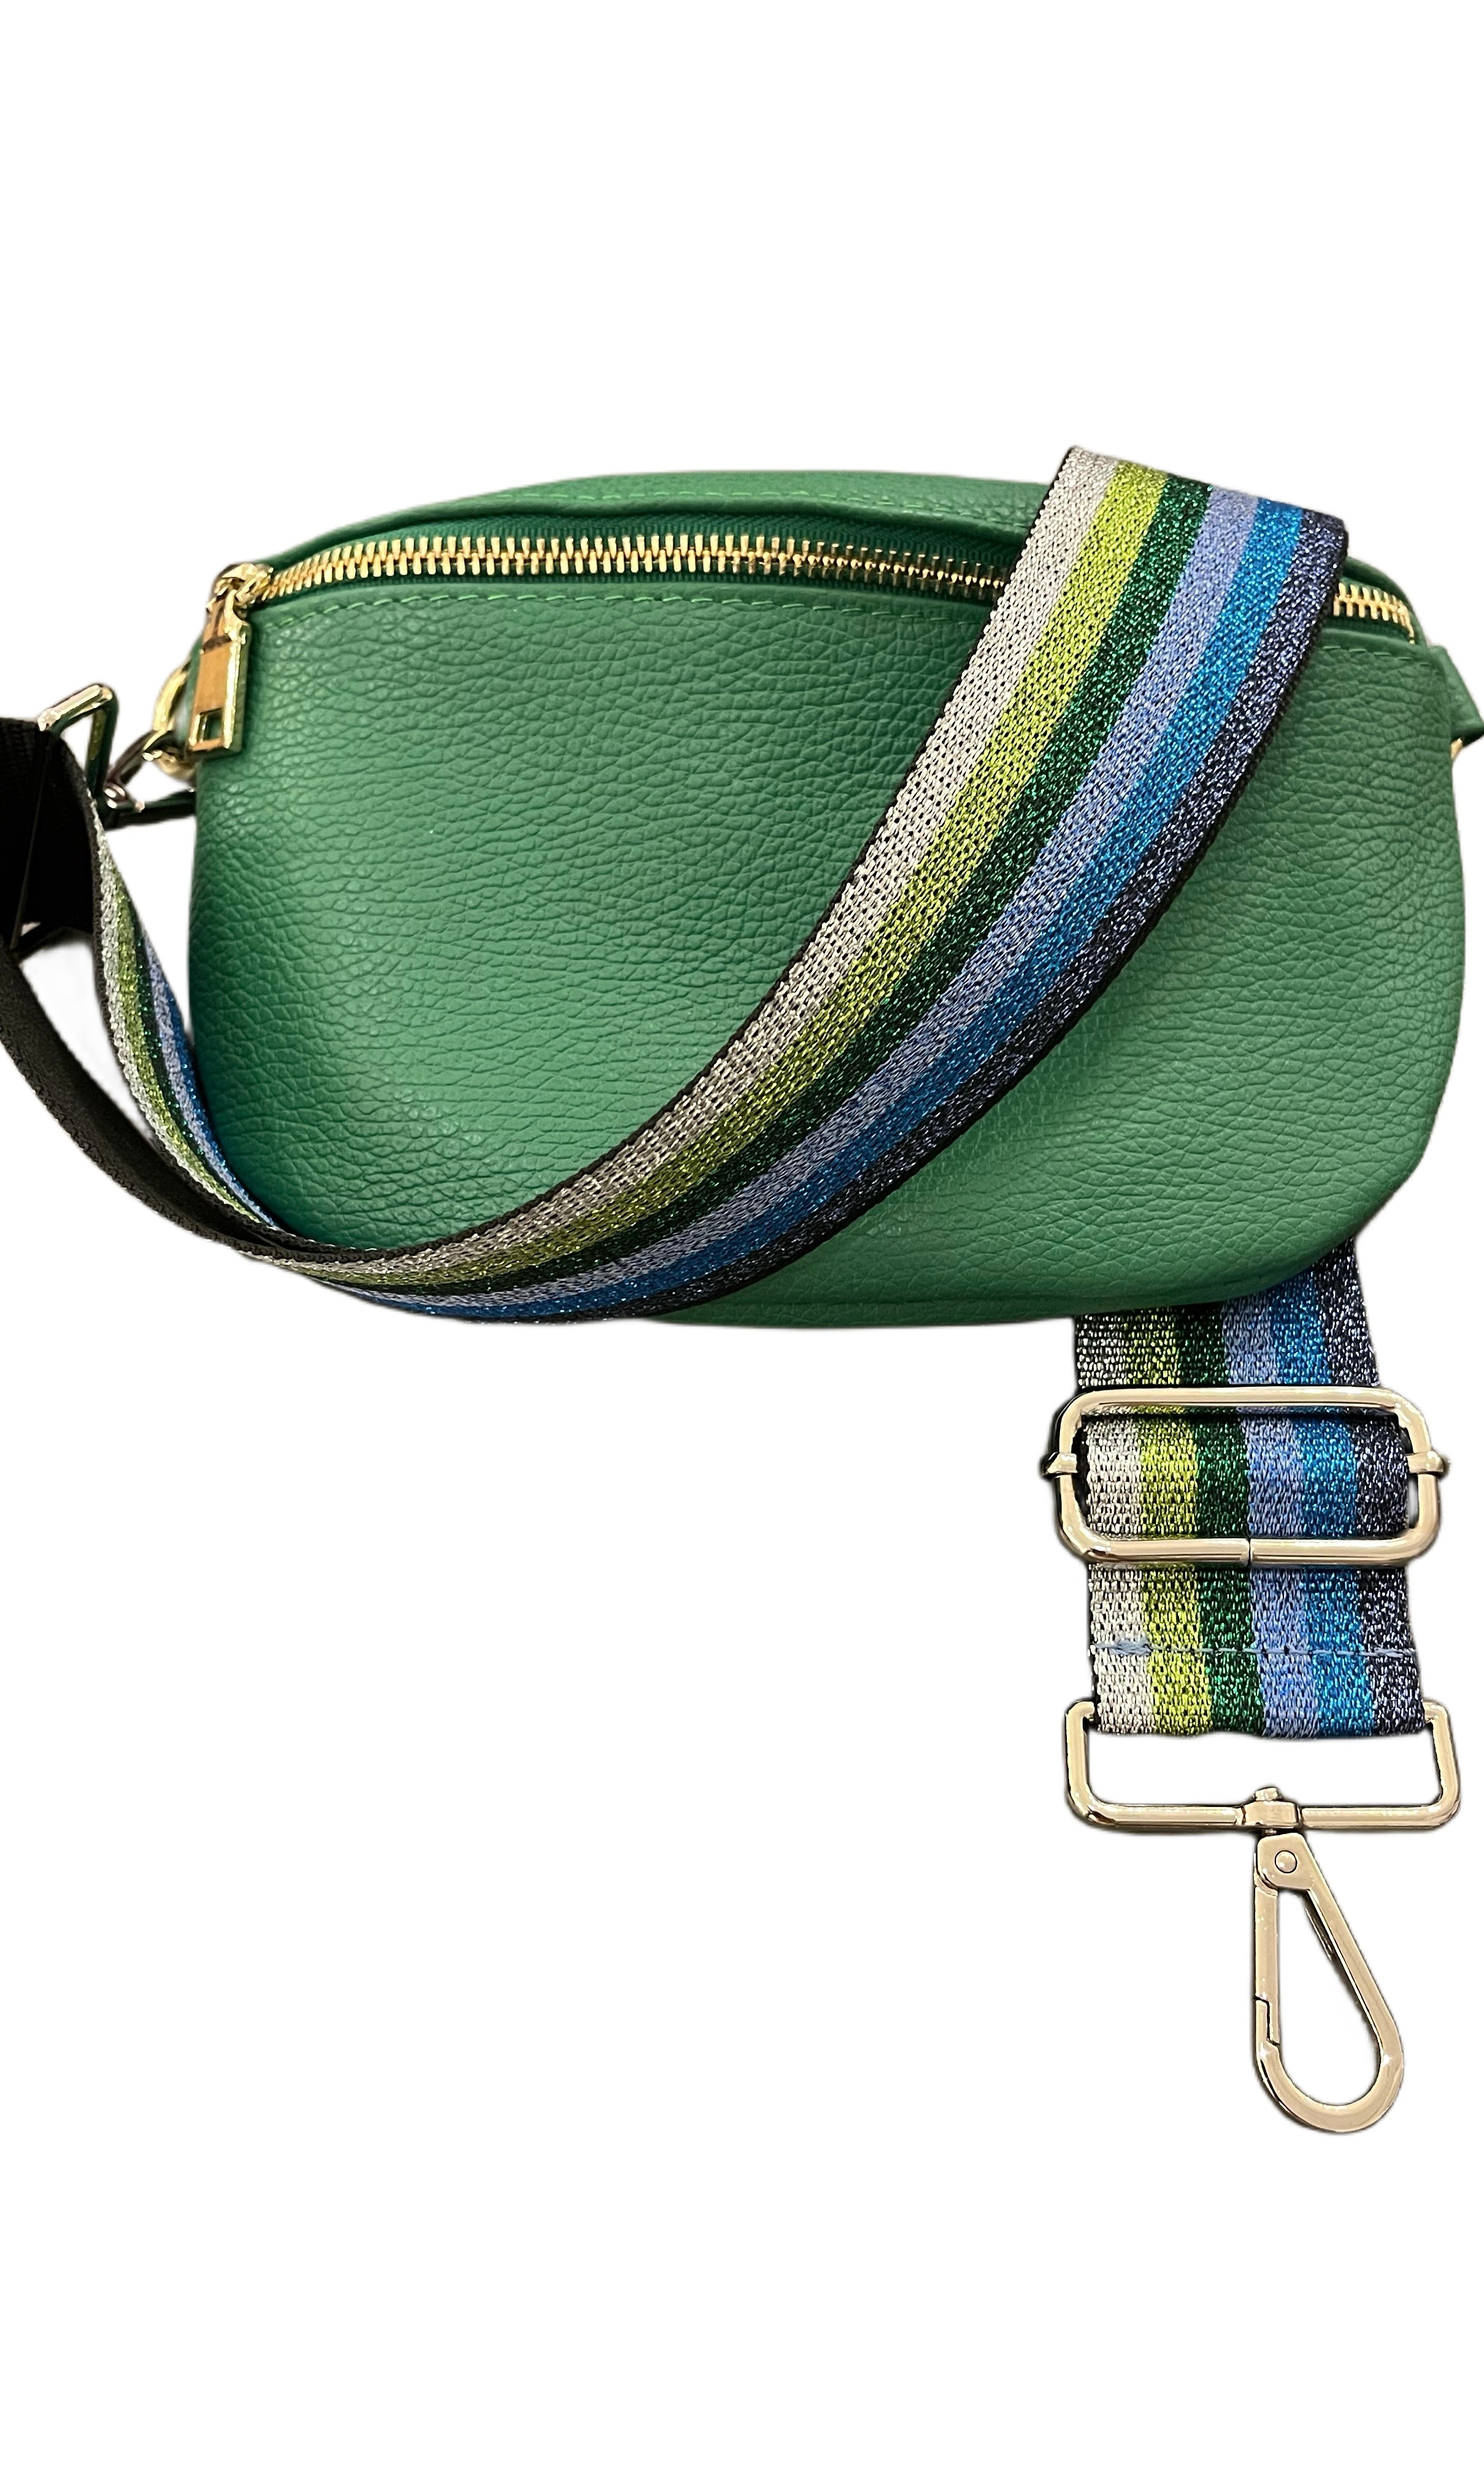 Bodella large green leather hip bag-Extra outside zipper pocket-made in Italy